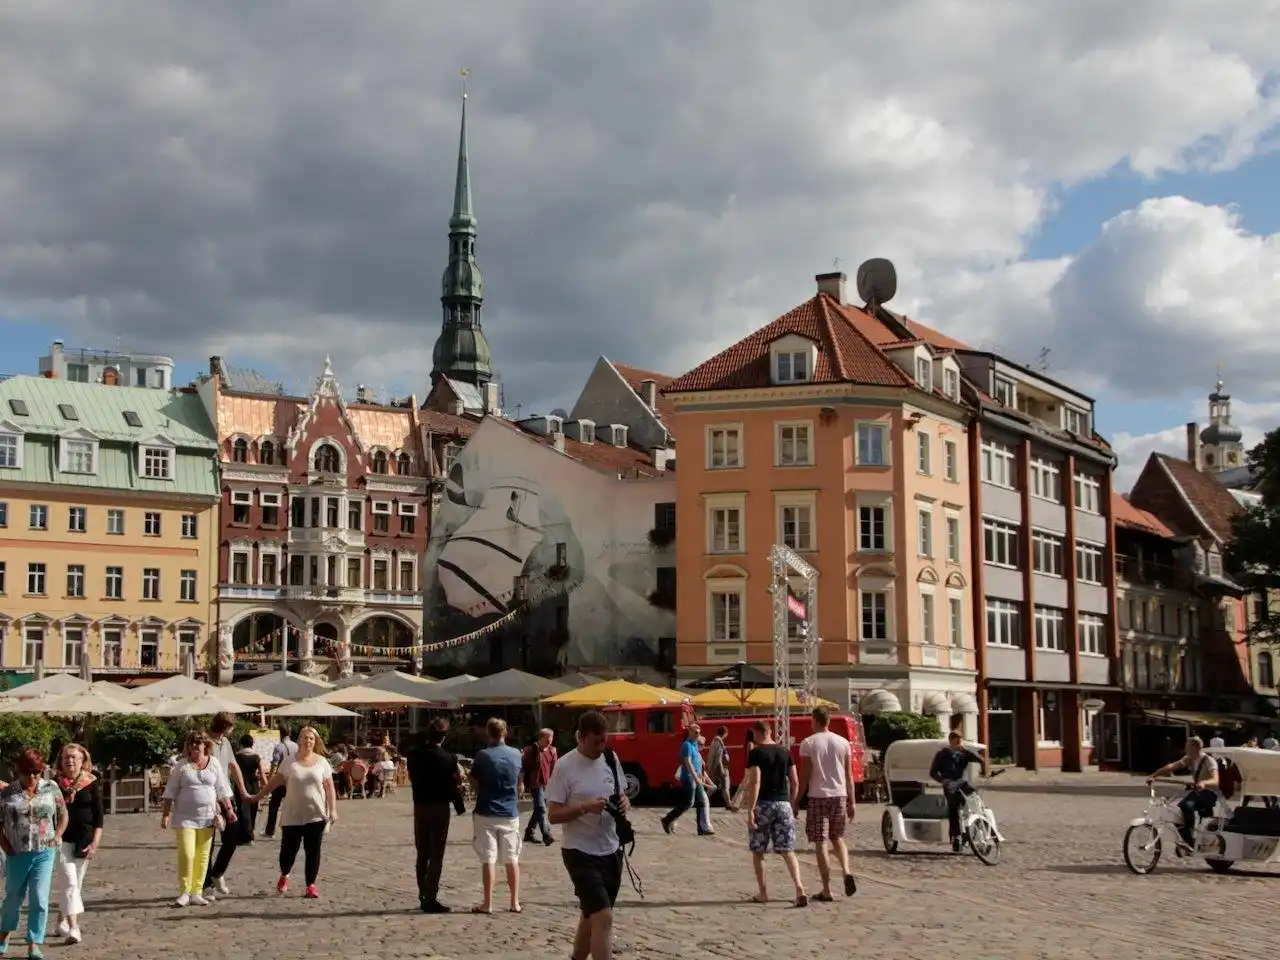 Solo Travel Baltics: 10 Reasons Why You Should Visit The Baltics As A Solo